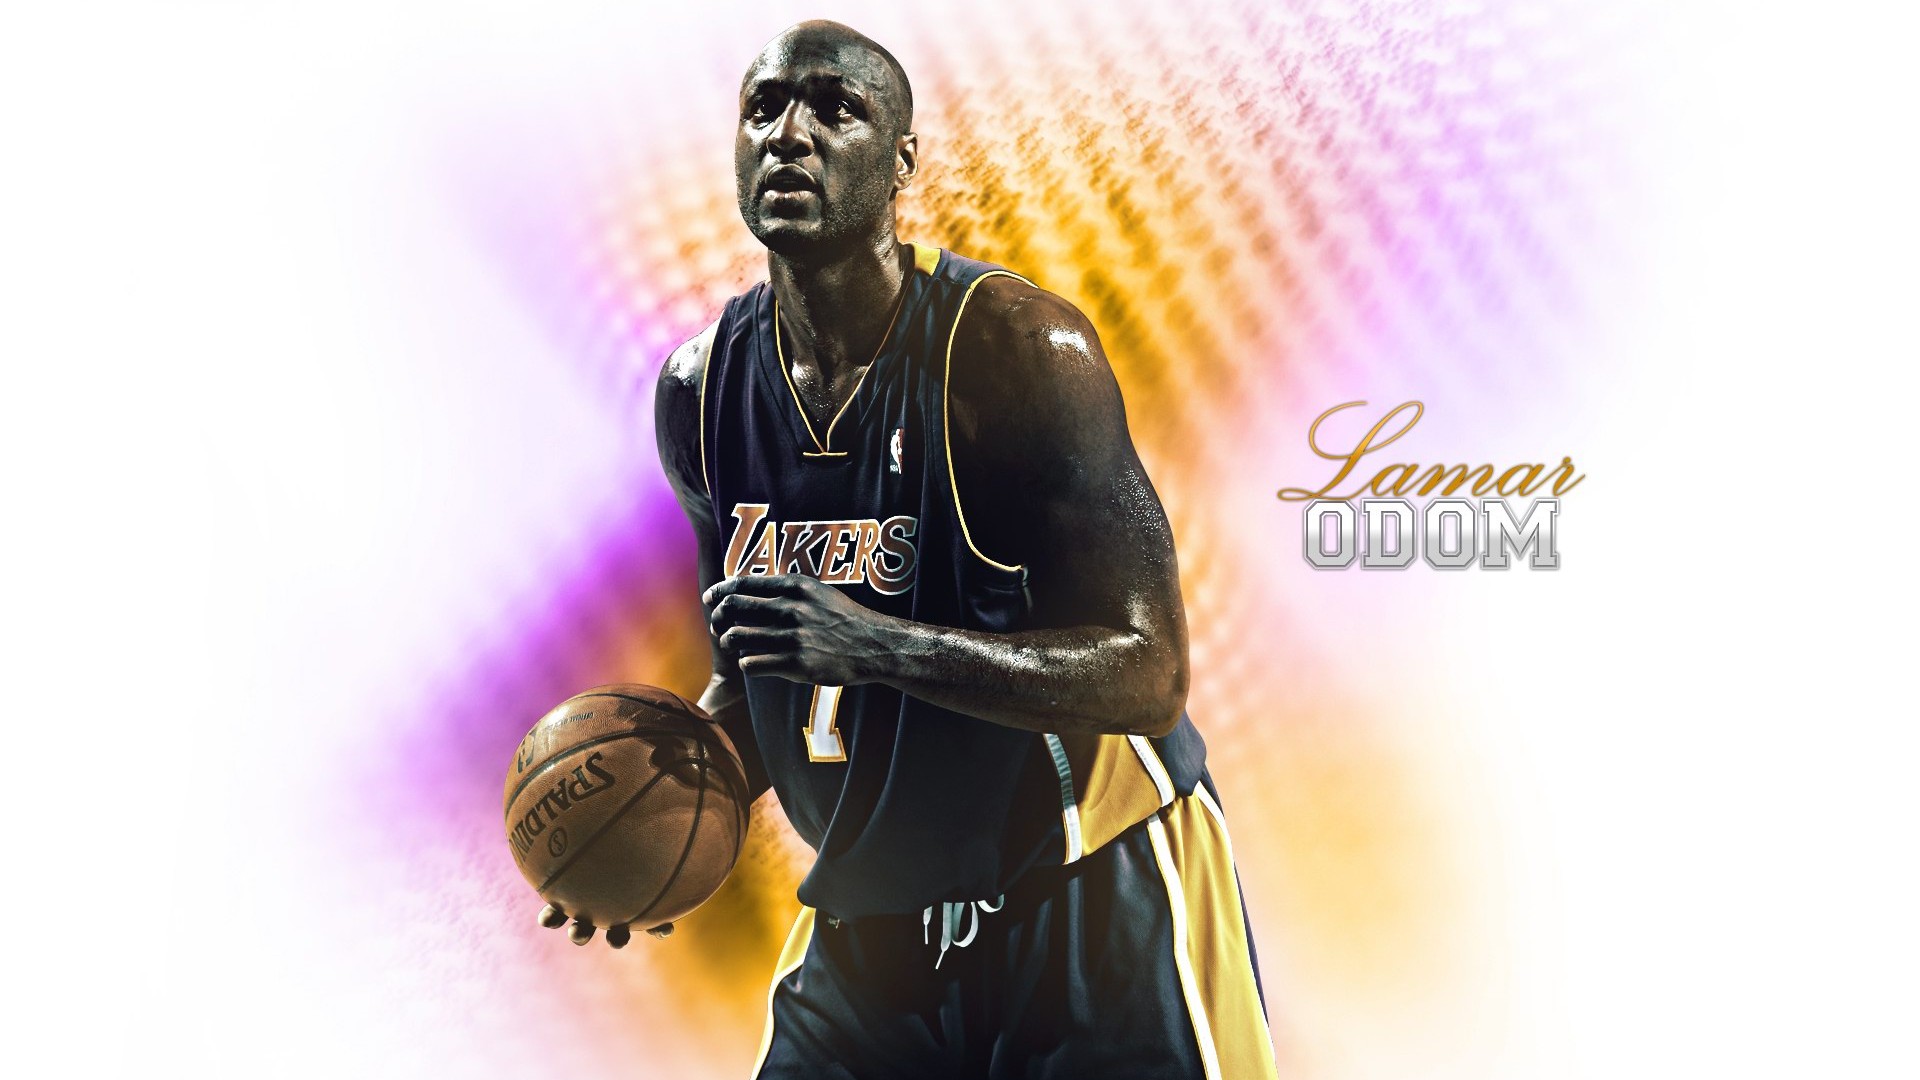 Los Angeles Lakers Wallpaper Oficial #17 - 1920x1080